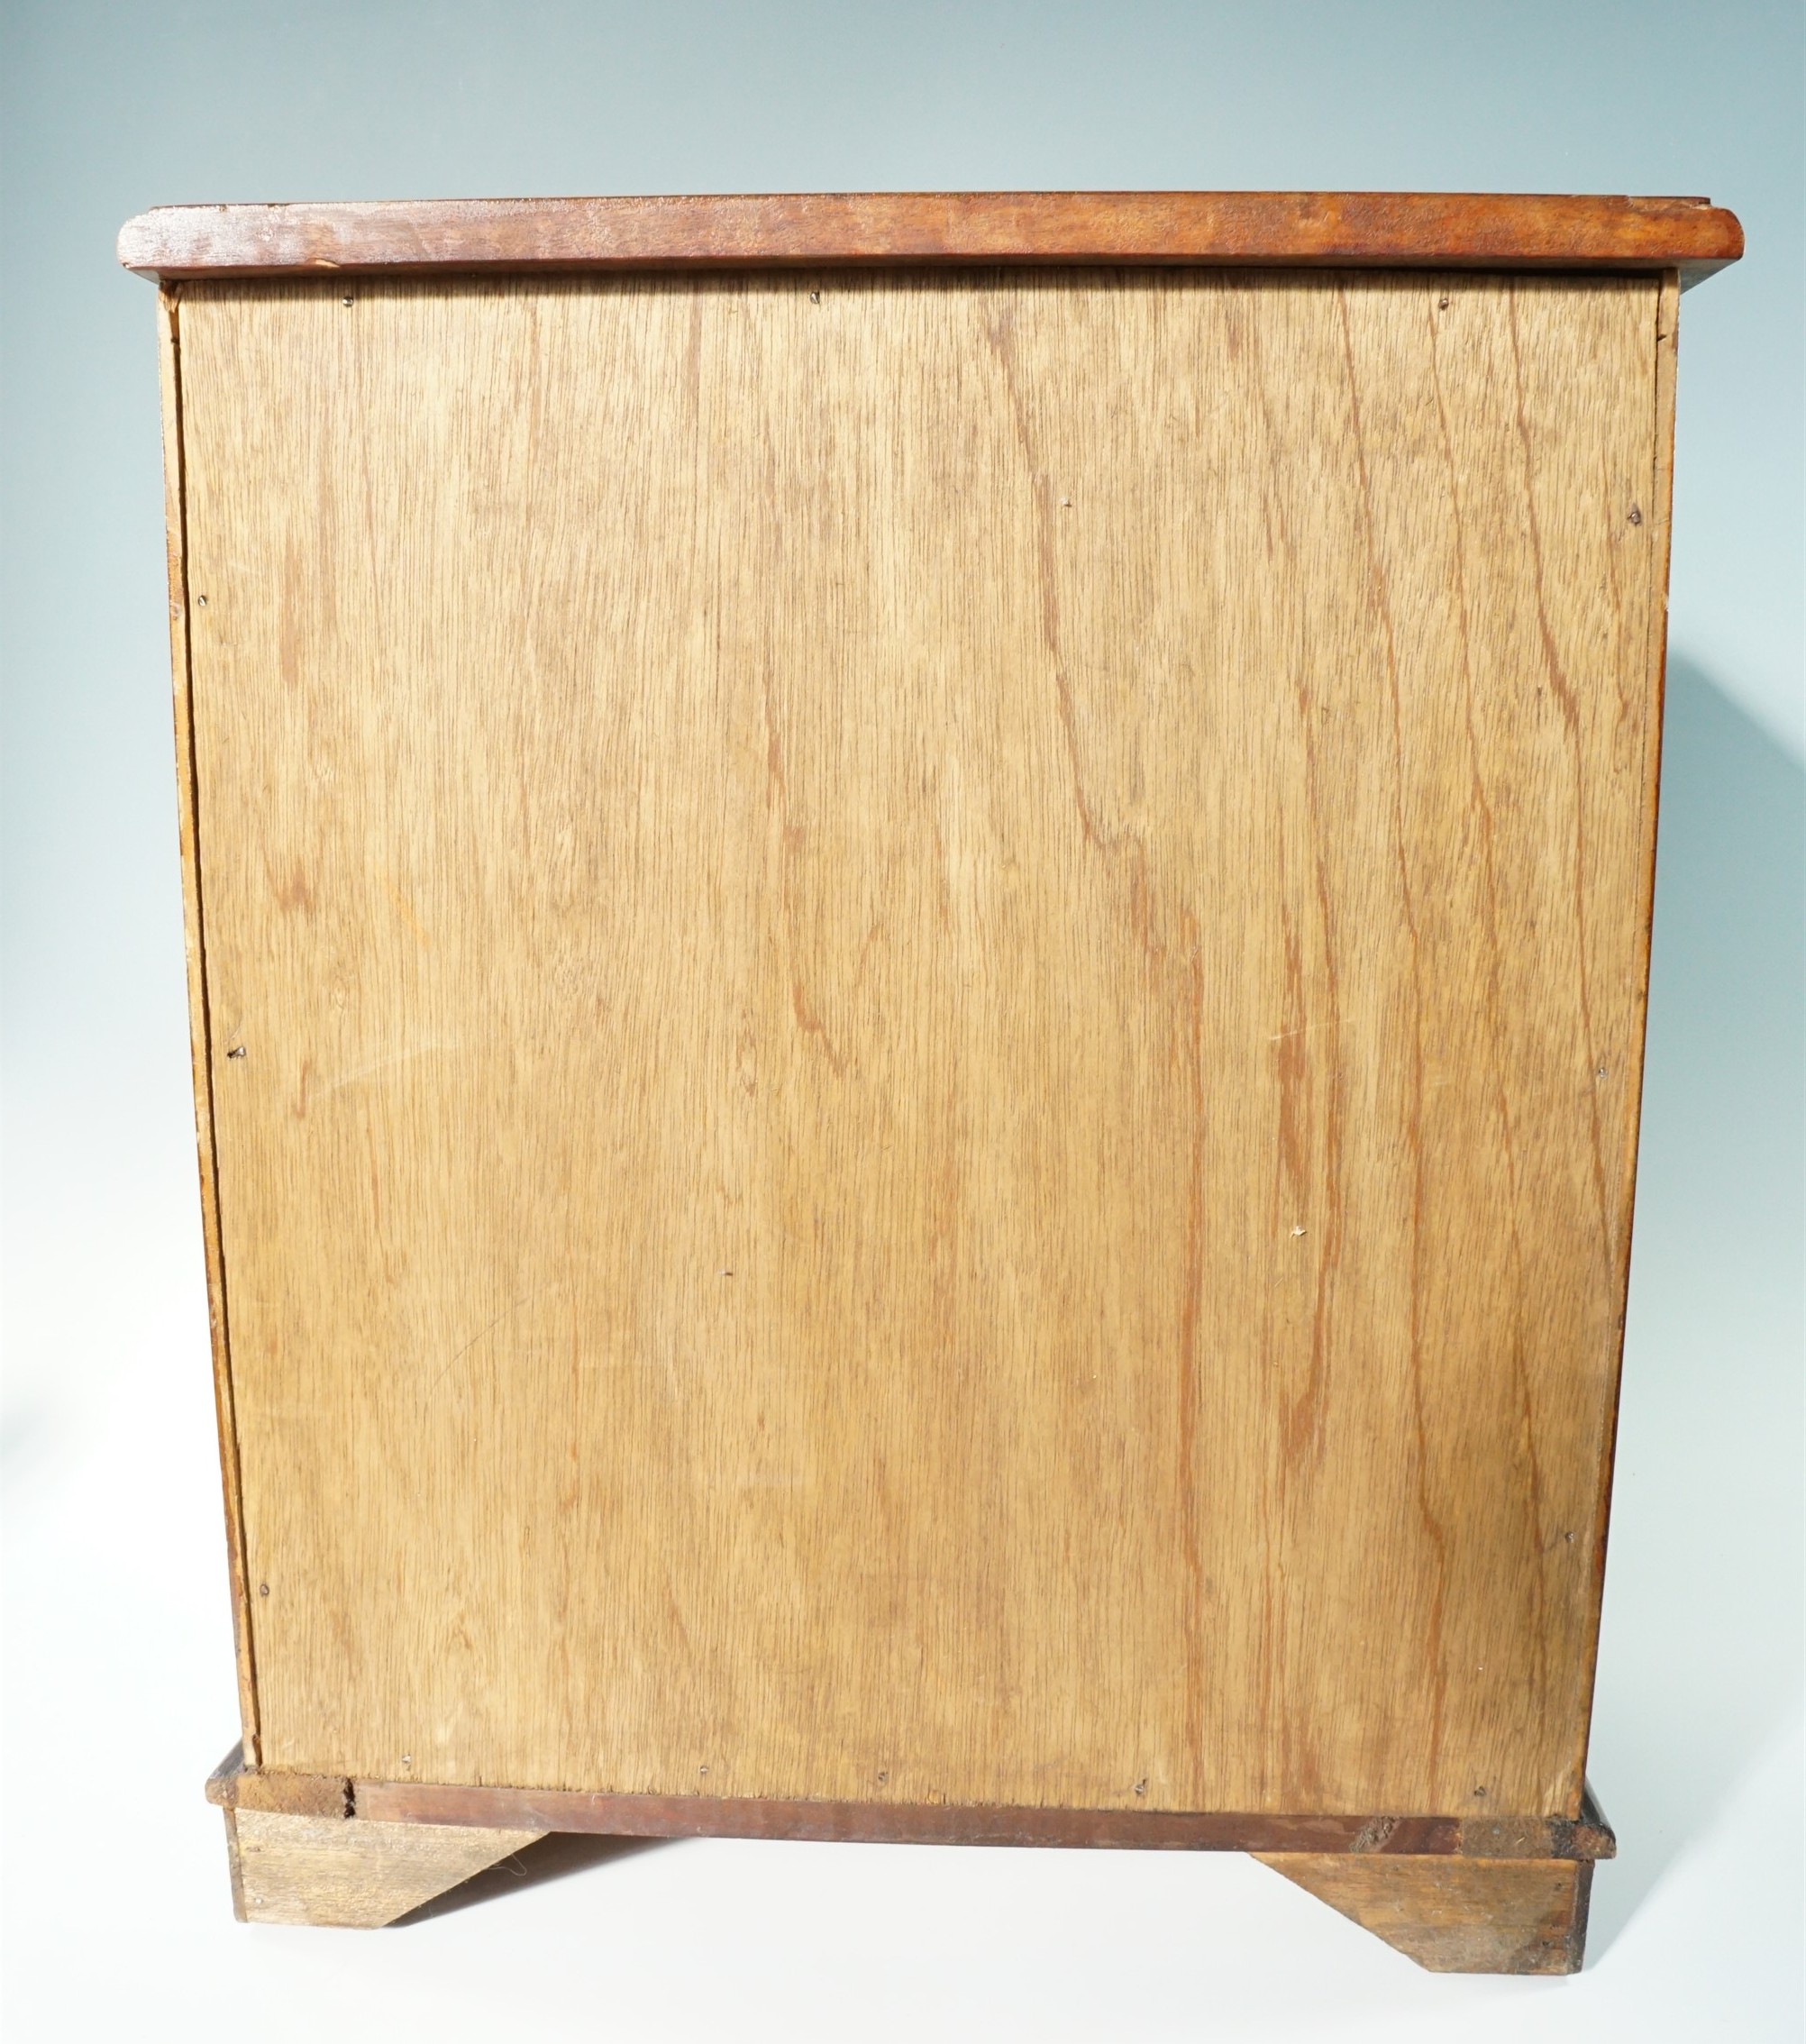 A miniature early 19th Century style mahogany cross-banded chest of drawers, 43 cm x 29 cm x 53 cm - Image 5 of 5